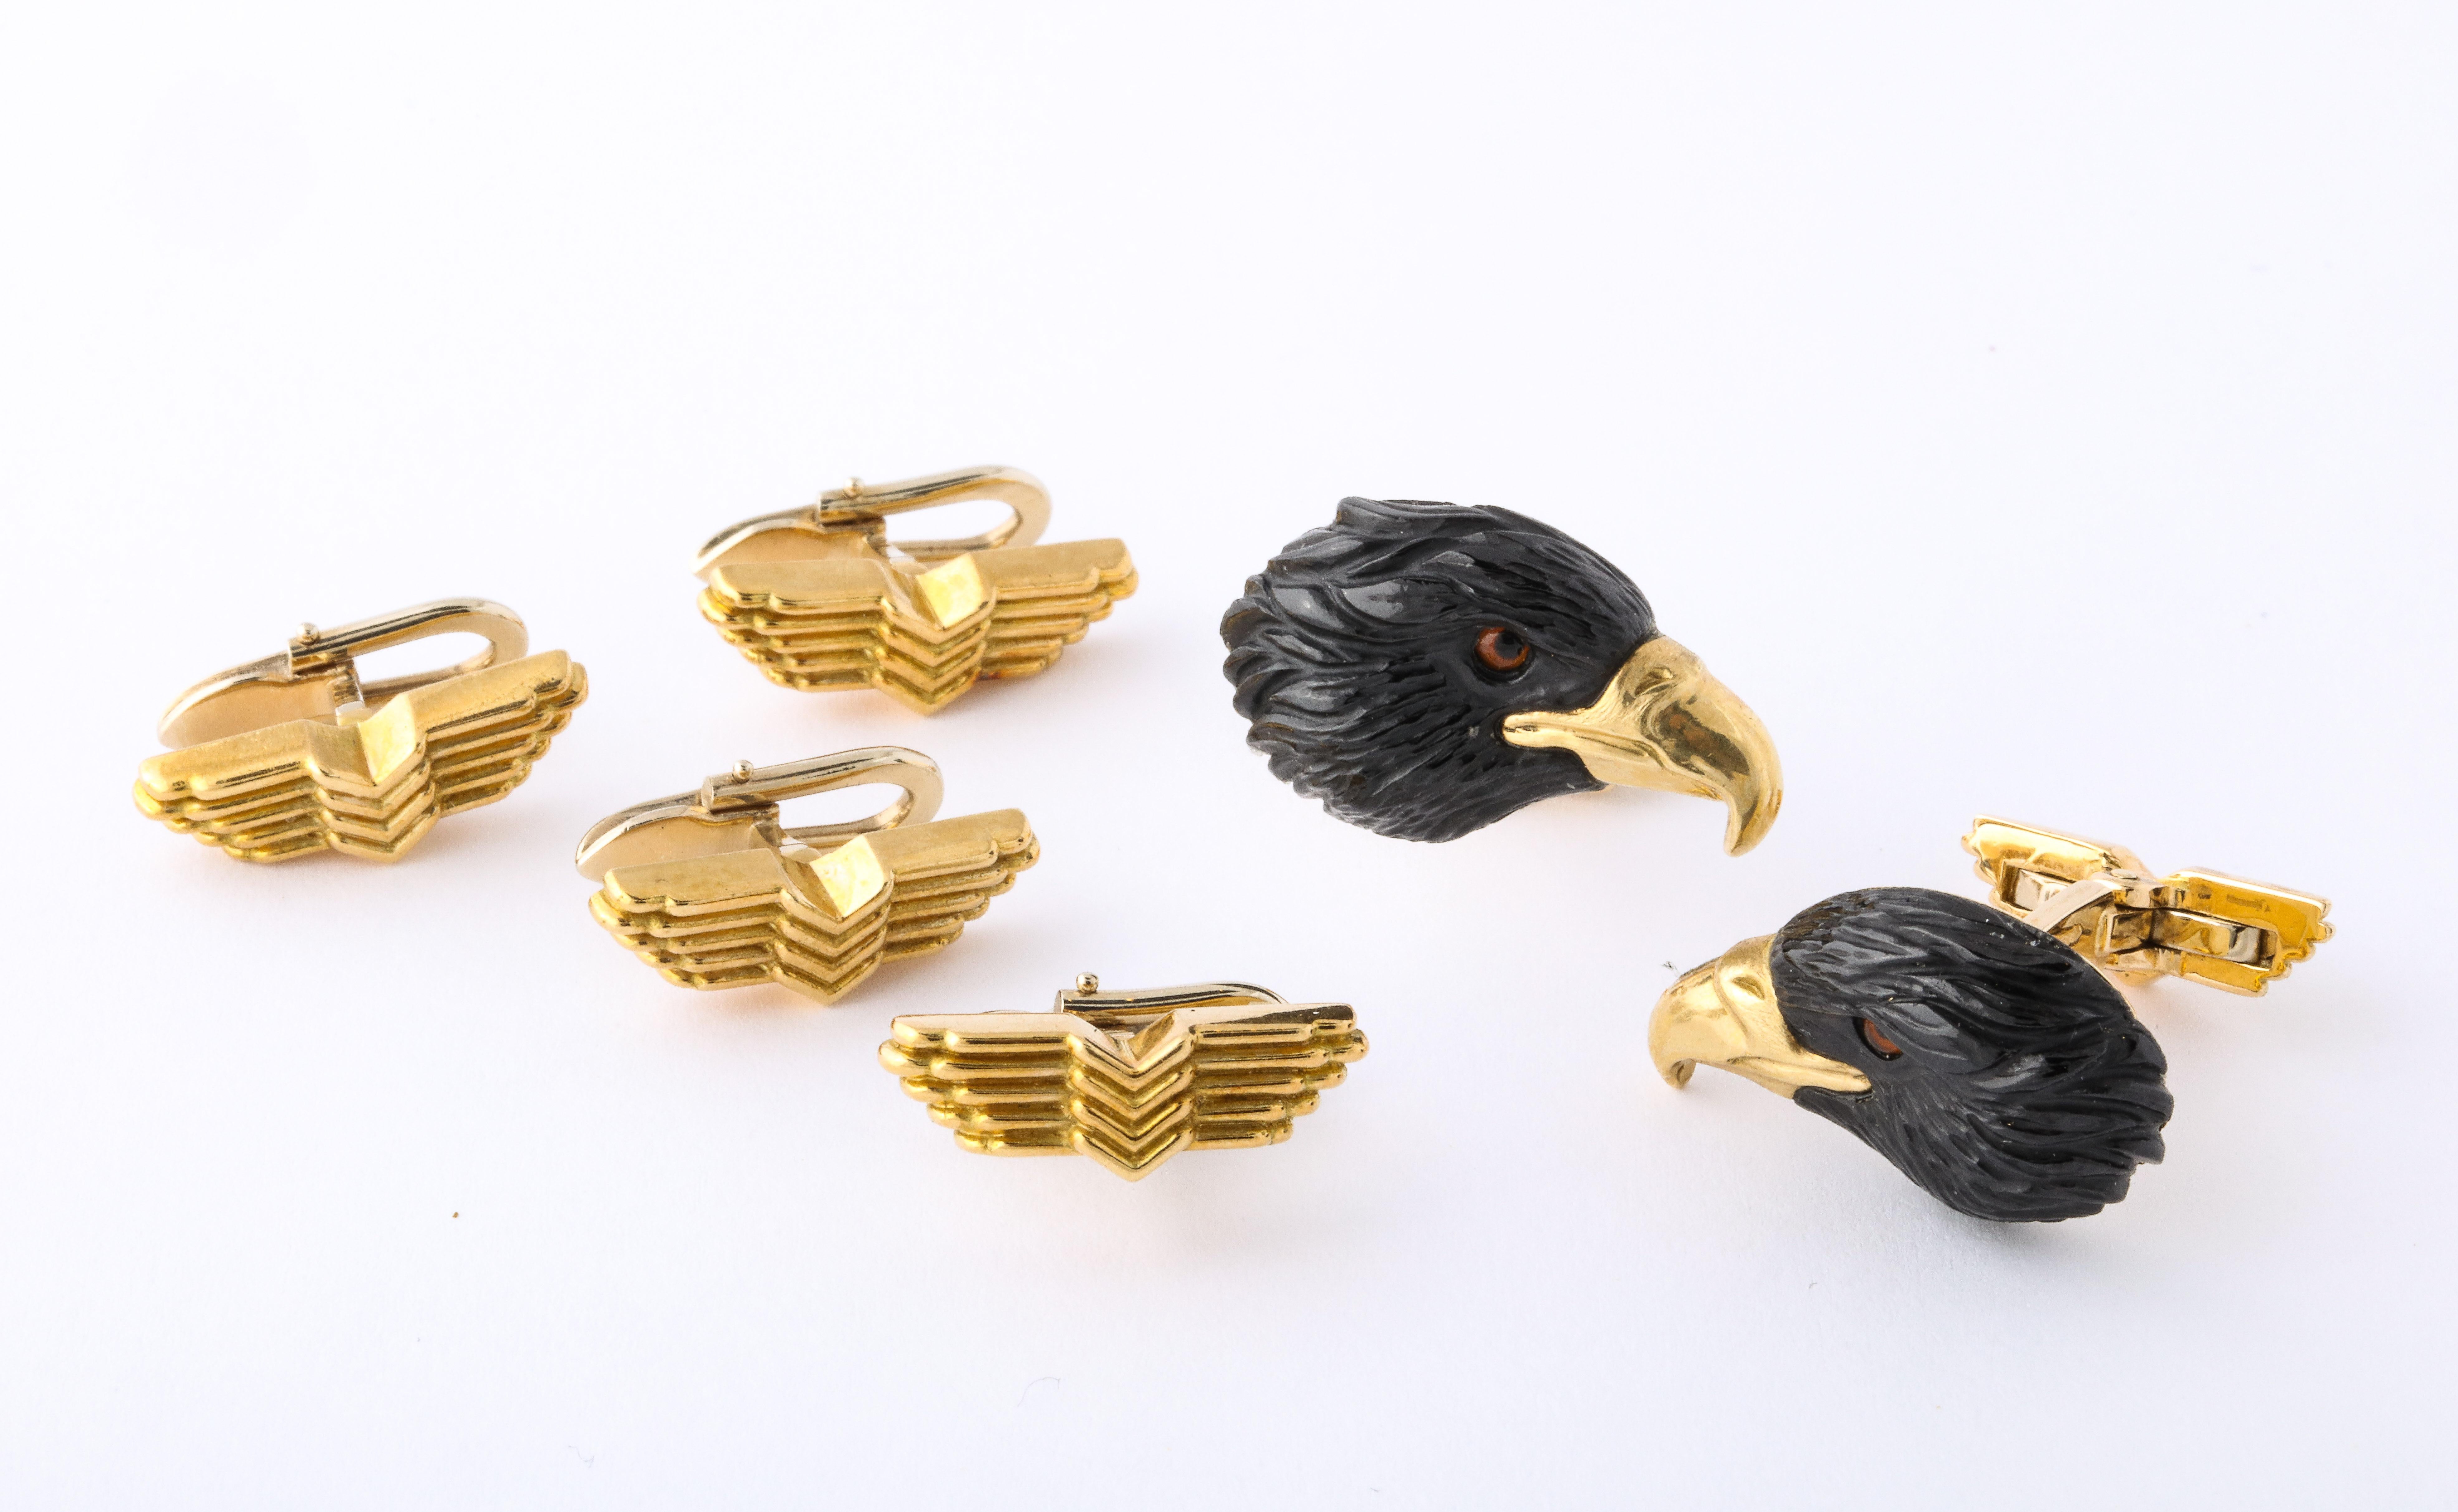 The cufflinks are comprised of expertly carved black tourmaline eagle heads with rock crystal and enamel eyes and 18kt yellow gold beaks.  The spring back portrays a sculptural version of the eagle's wings, as do the matching shirt studs.  This bold